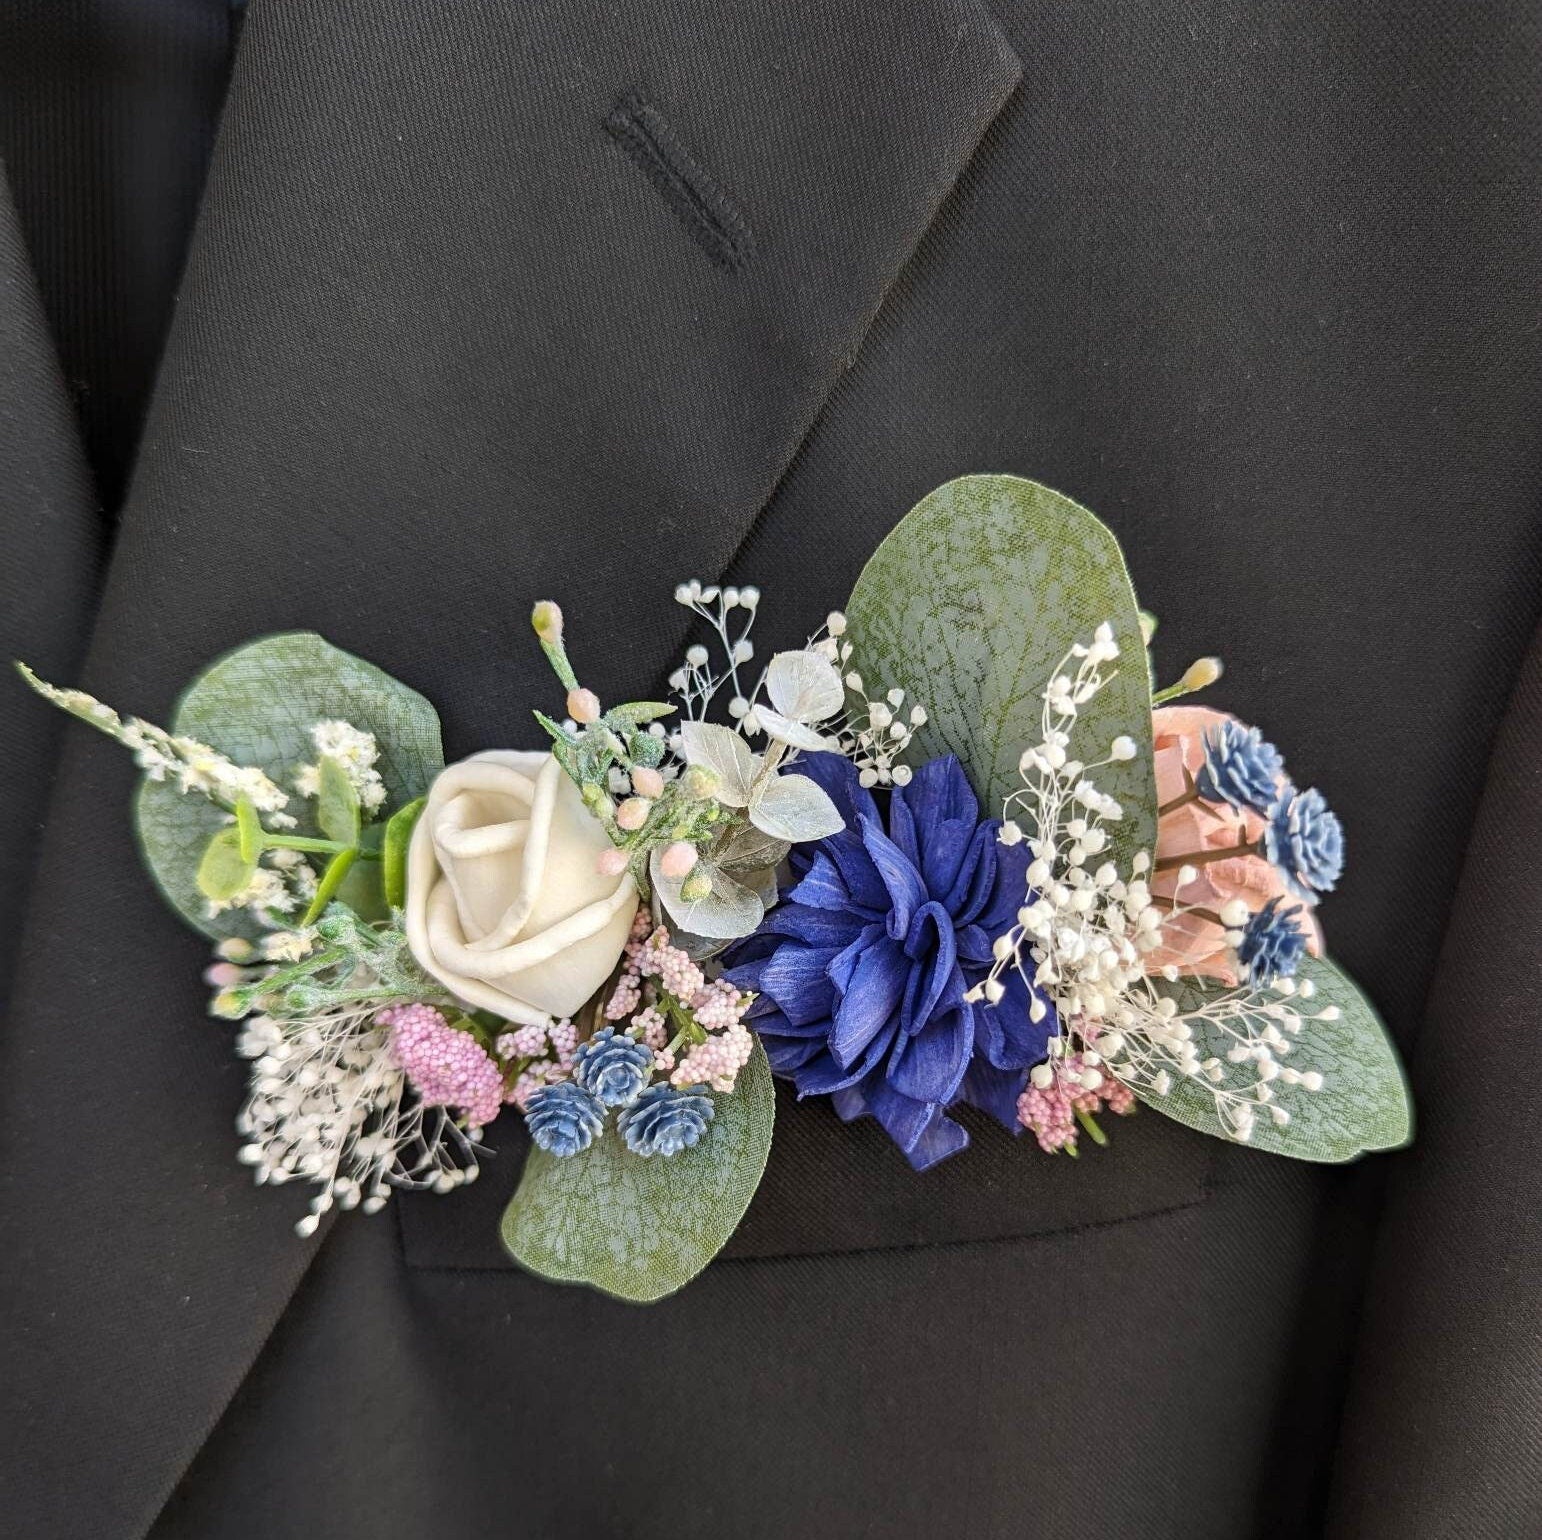 Wood Flower Pocket Boutonniere for Groom, Wooden Flowers Groom Boutonniere, Groomsmen Wedding Flowers, Wedding Boutonniere